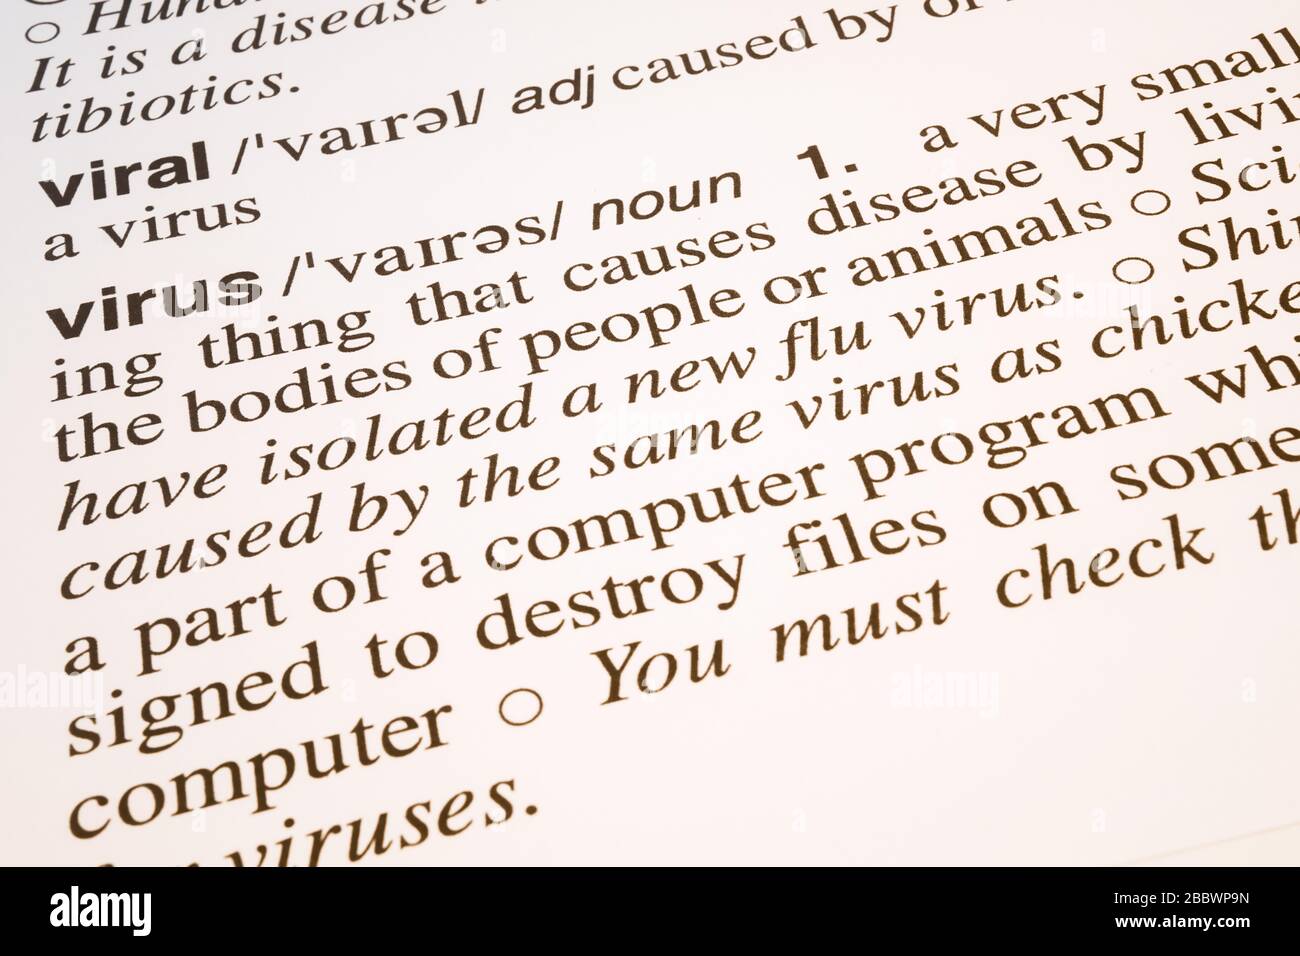 Viral and virus words meaning and definition text in English dictionary, Close up text of viral and virus words Stock Photo